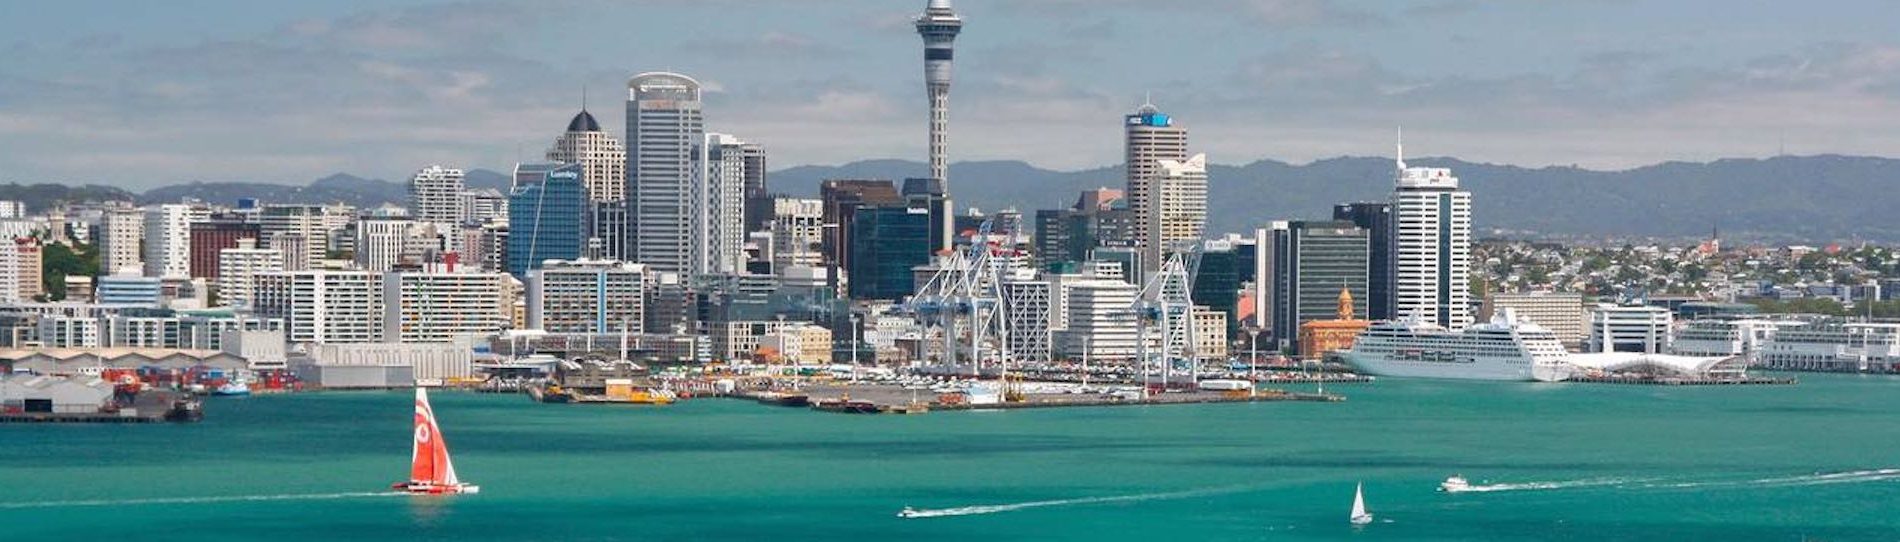 view of city and ocean in auckland